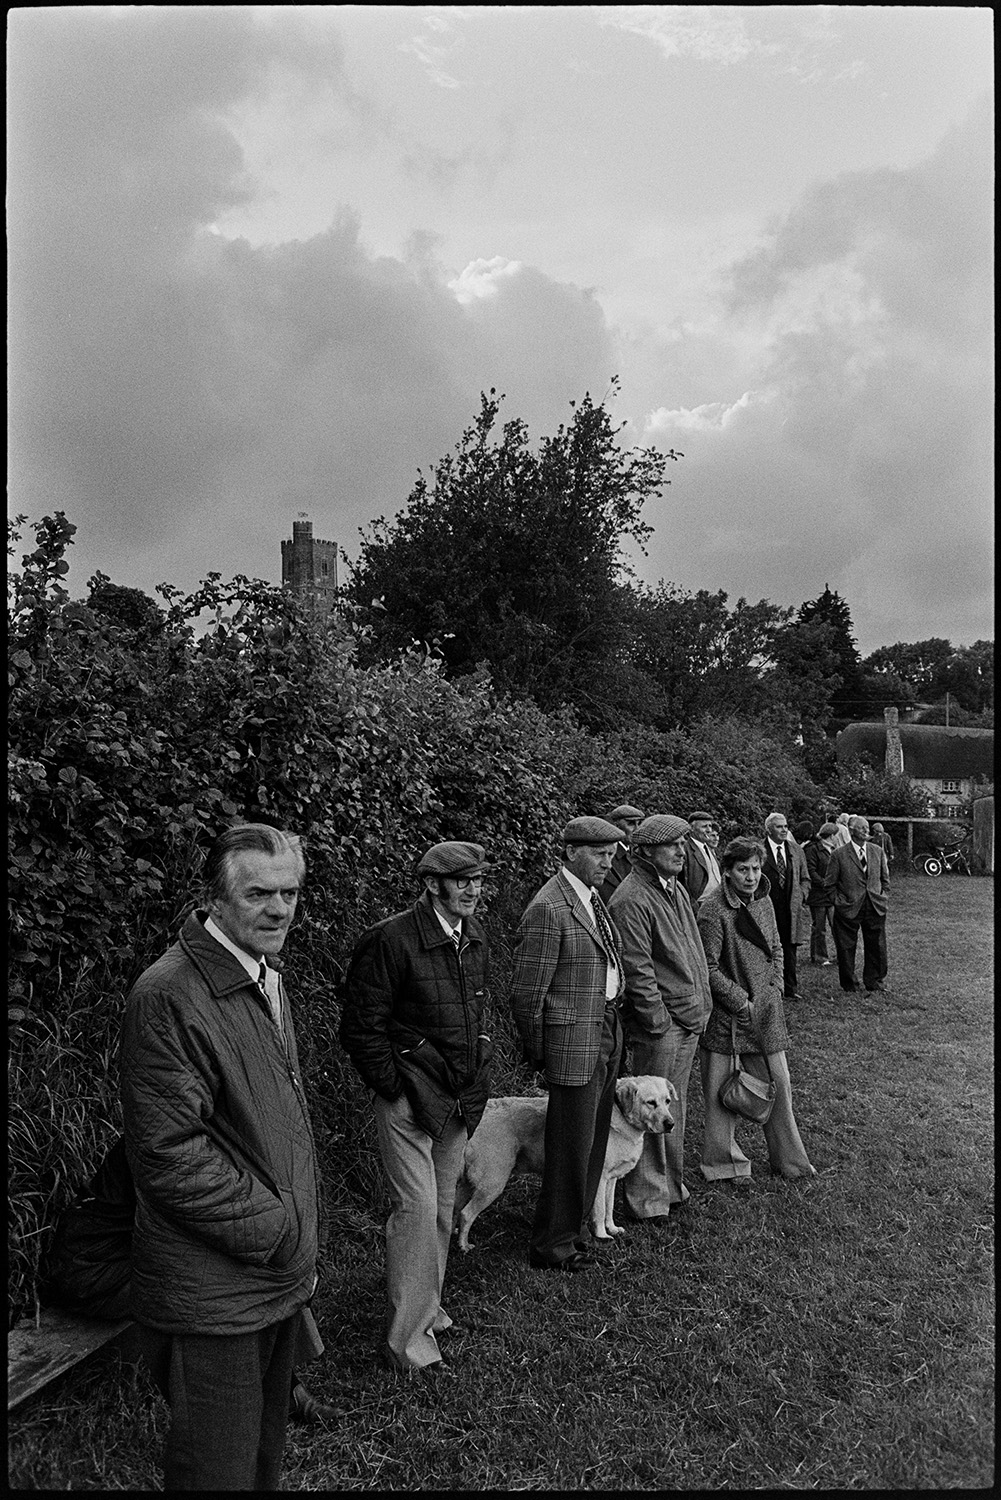 Jubilee football match with spectators. 
[Spectators at village football match in Atherington to celebrate  the Silver Jubilee of Queen Elizabeth II. One of the spectators has a dog and Atherington Church tower is visible in the background.]